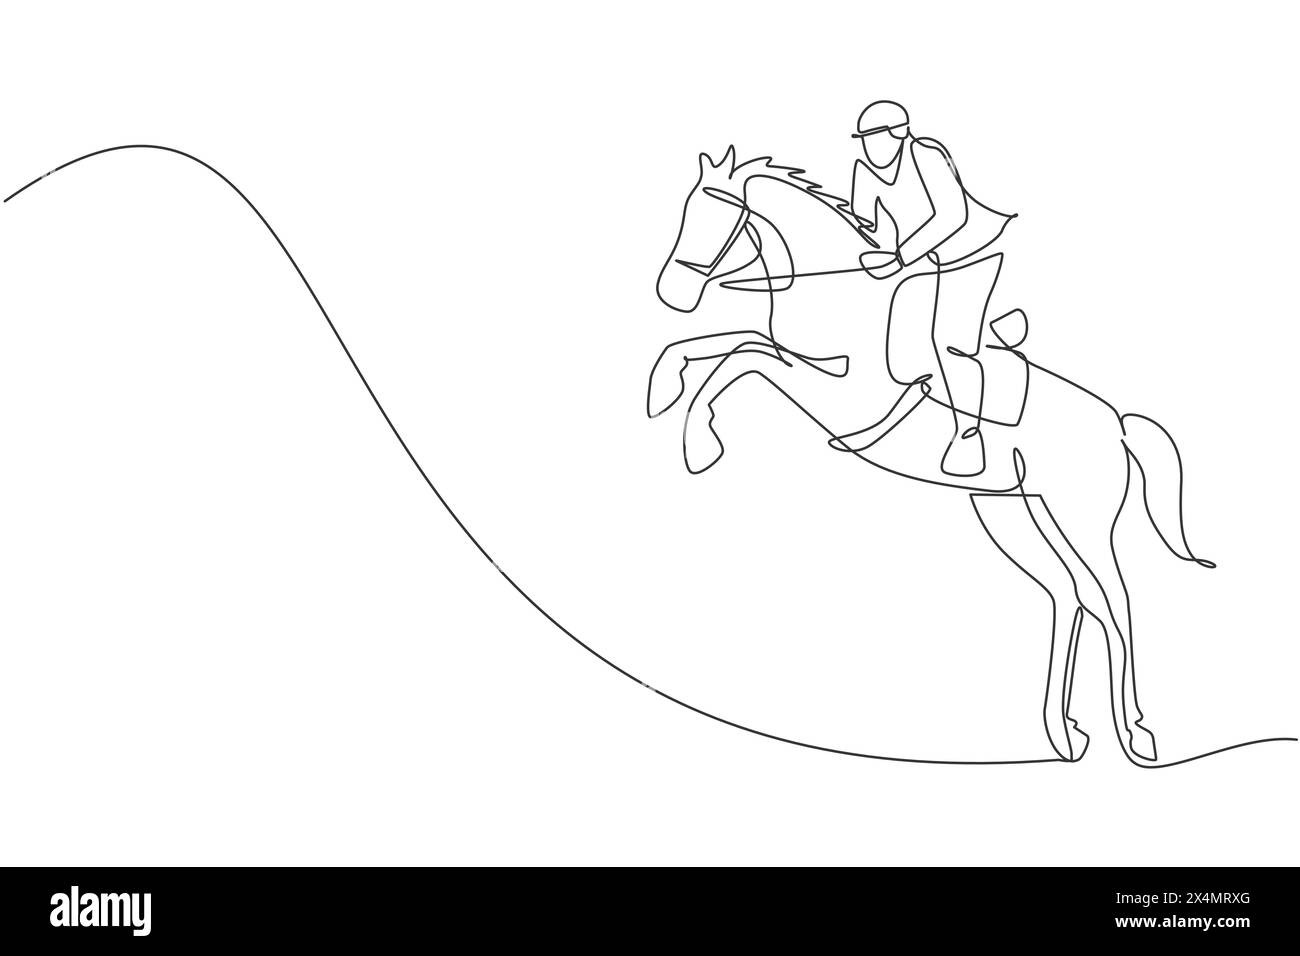 One continuous line drawing young horse rider man in jumping action. Equine training at racing track. Equestrian sport competition concept. Dynamic si Stock Vector